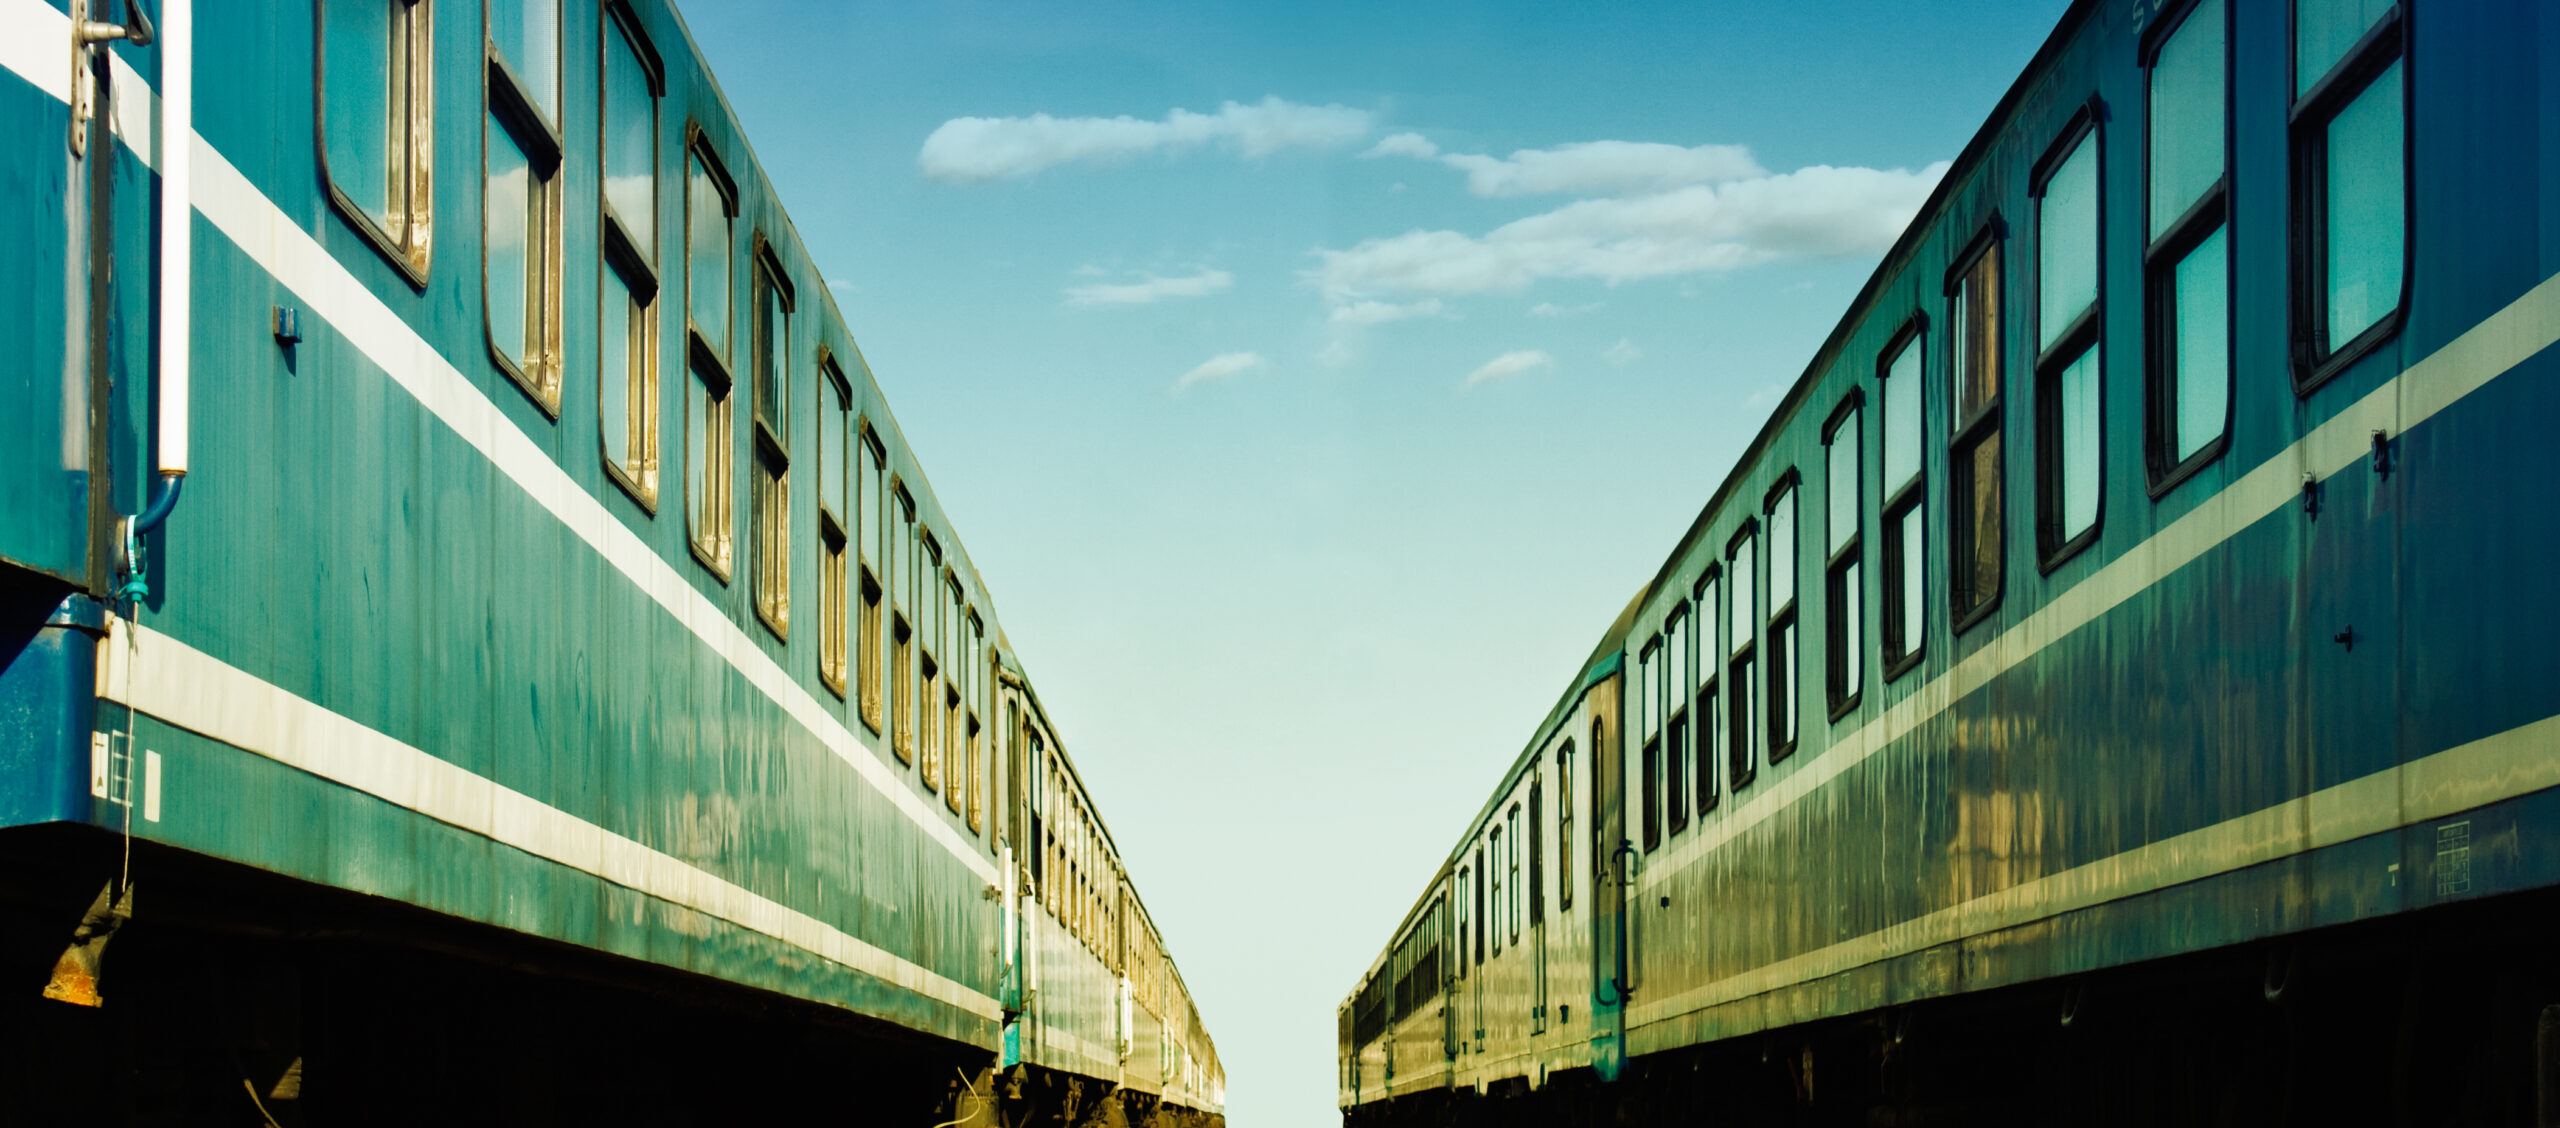 Two trains at the train station with blue sky background.